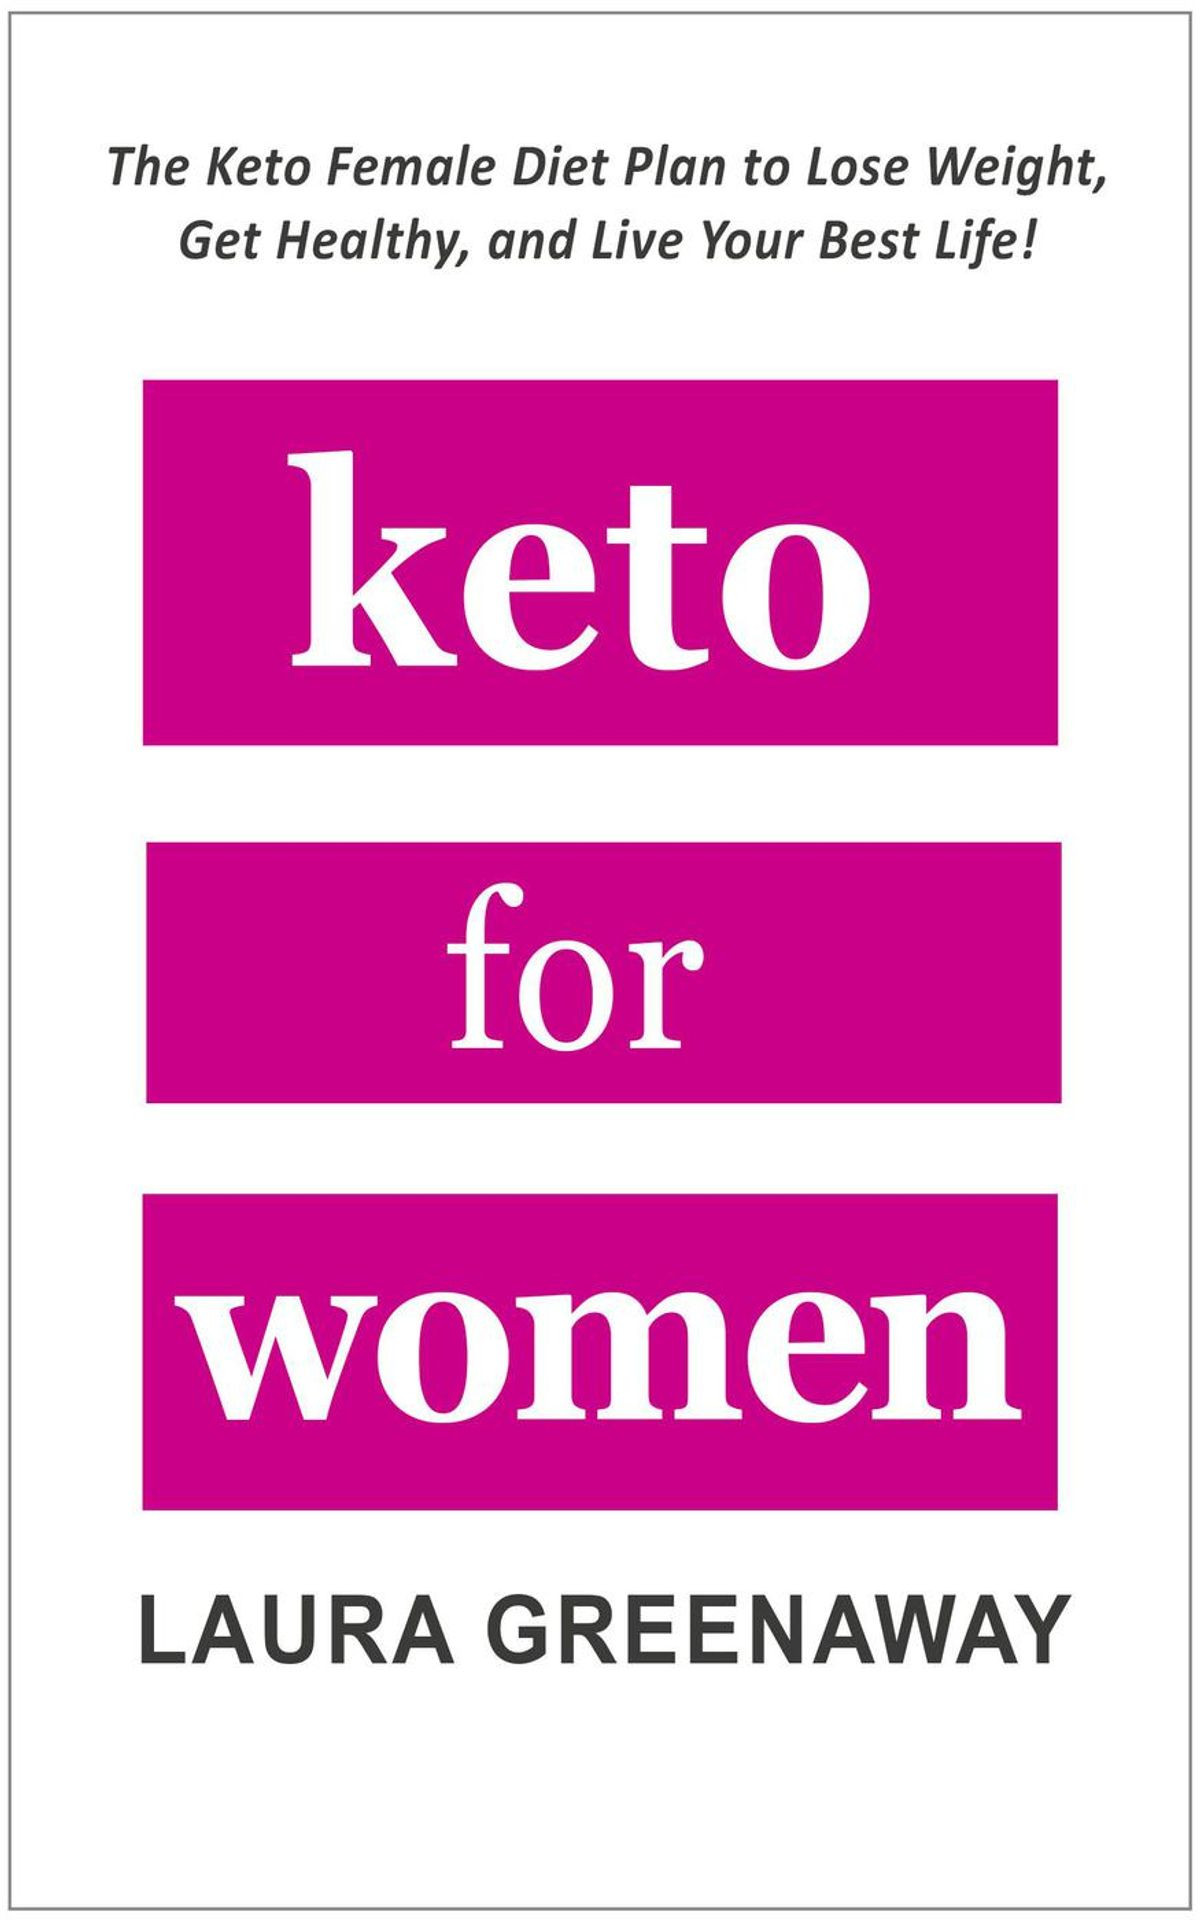 Keto Diet Plans To Lose Weight For Women
 Keto for Women The Keto Female Diet Plan to Lose Weight